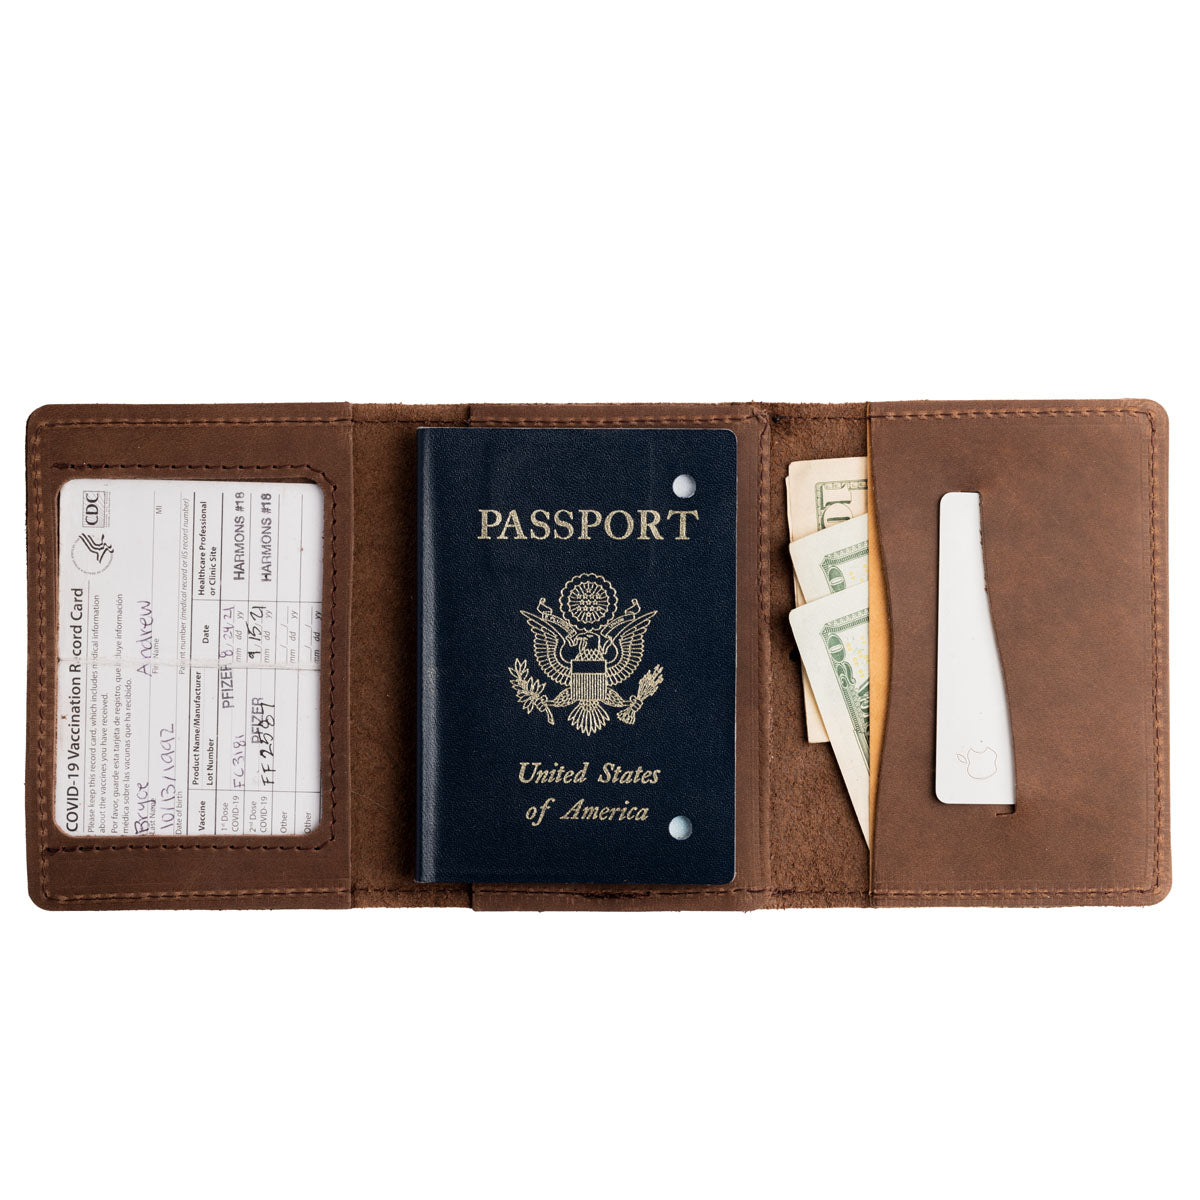 Leather bifold passport holder with embroidered logo